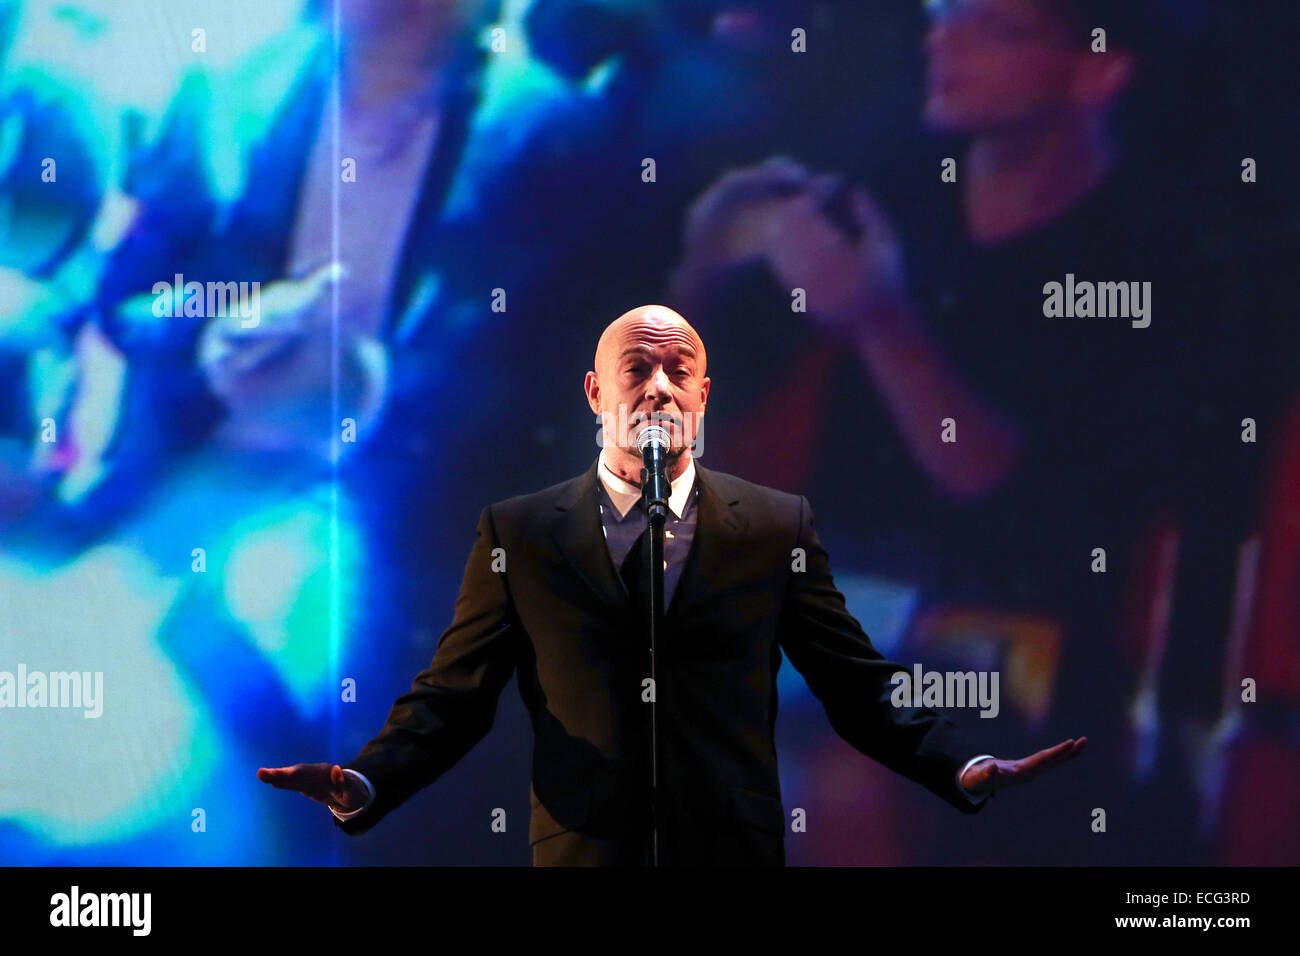 Nuremberg, Germany. 13th Dec, 2014. The singer of the band 'Unheilig', 'Der Graf', performs on stage during the final edition of the German television game show 'Wetten, dass.?' (Wanna bet.?), aired on public broadaster ZDF, in Nuremberg, Germany, 13 December 2014. Germany's longtime television game show is now off air after 34 years. Photo: David Ebener/dpa/Alamy Live News Stock Photo